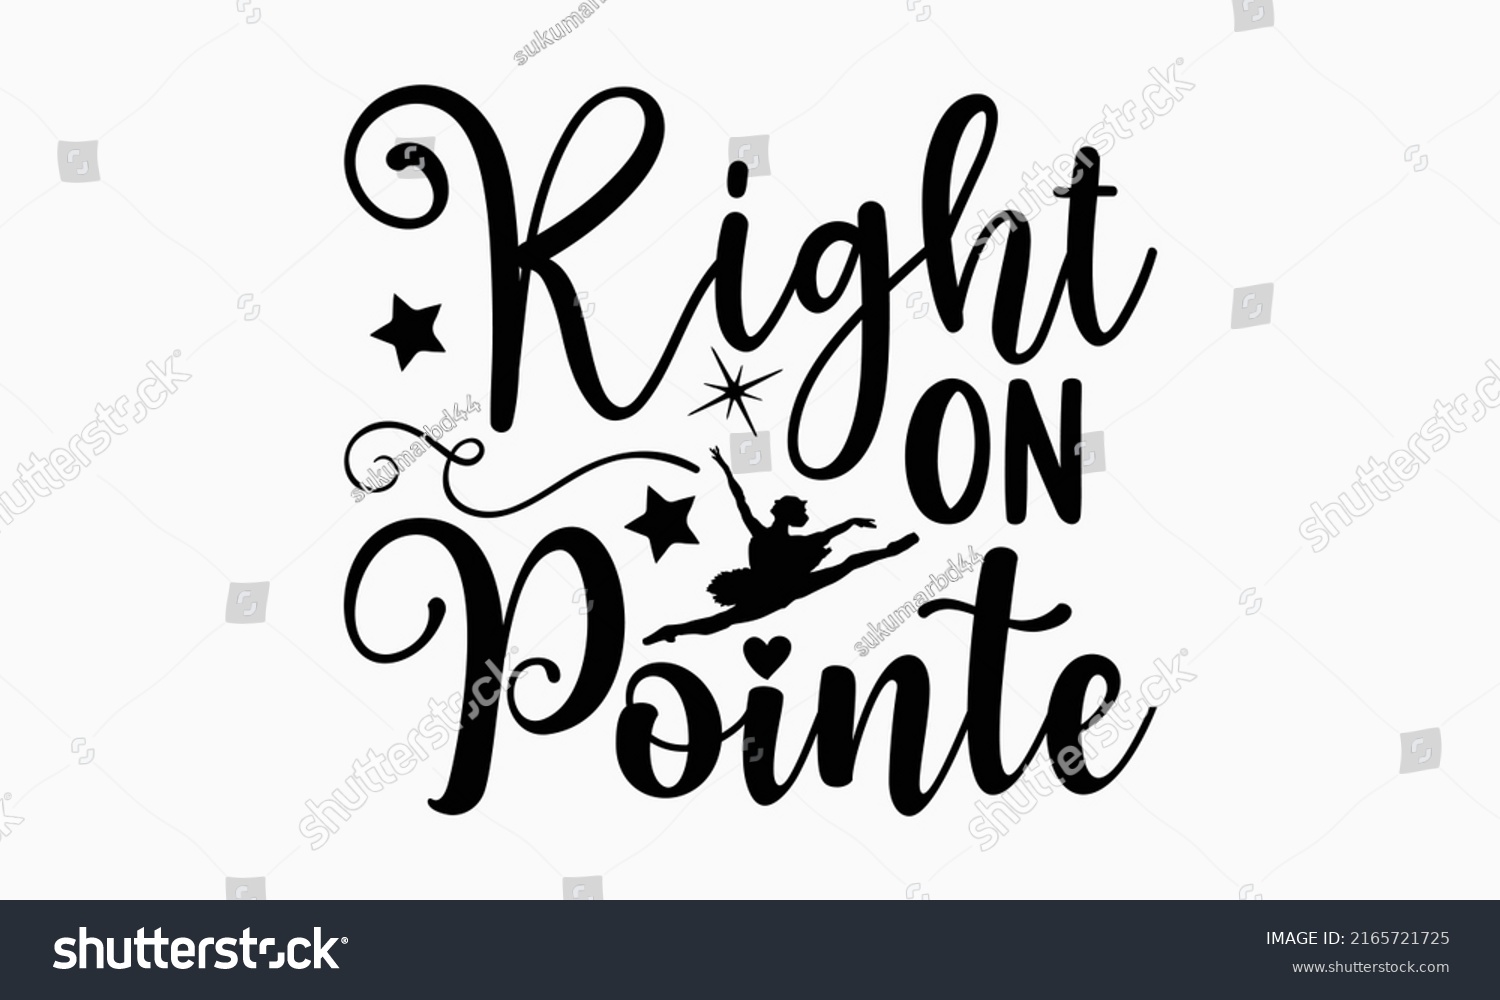 SVG of Right on pointe - Ballet t shirt design, Hand drawn lettering phrase, Calligraphy graphic design, SVG Files for Cutting Cricut and Silhouette svg